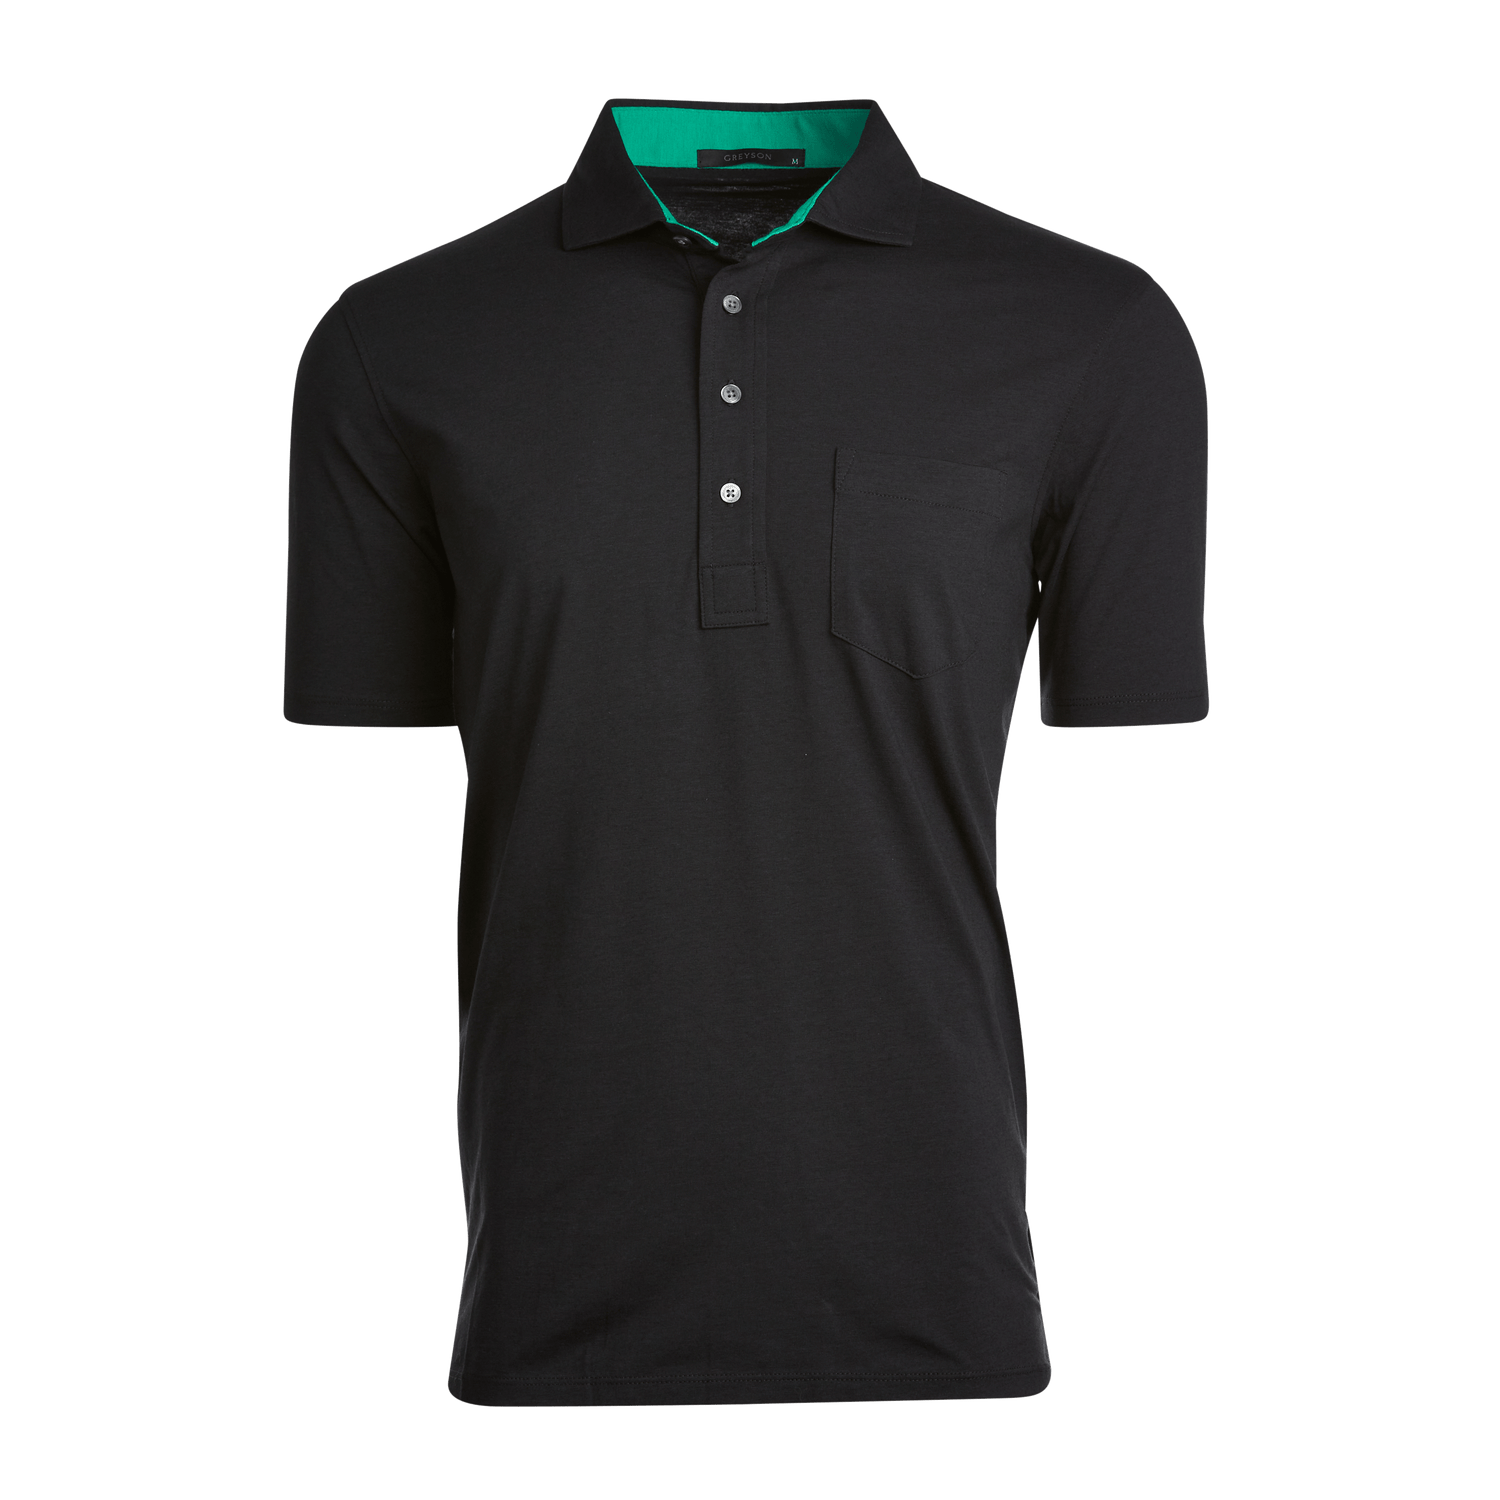 Spirit Polo Child Products